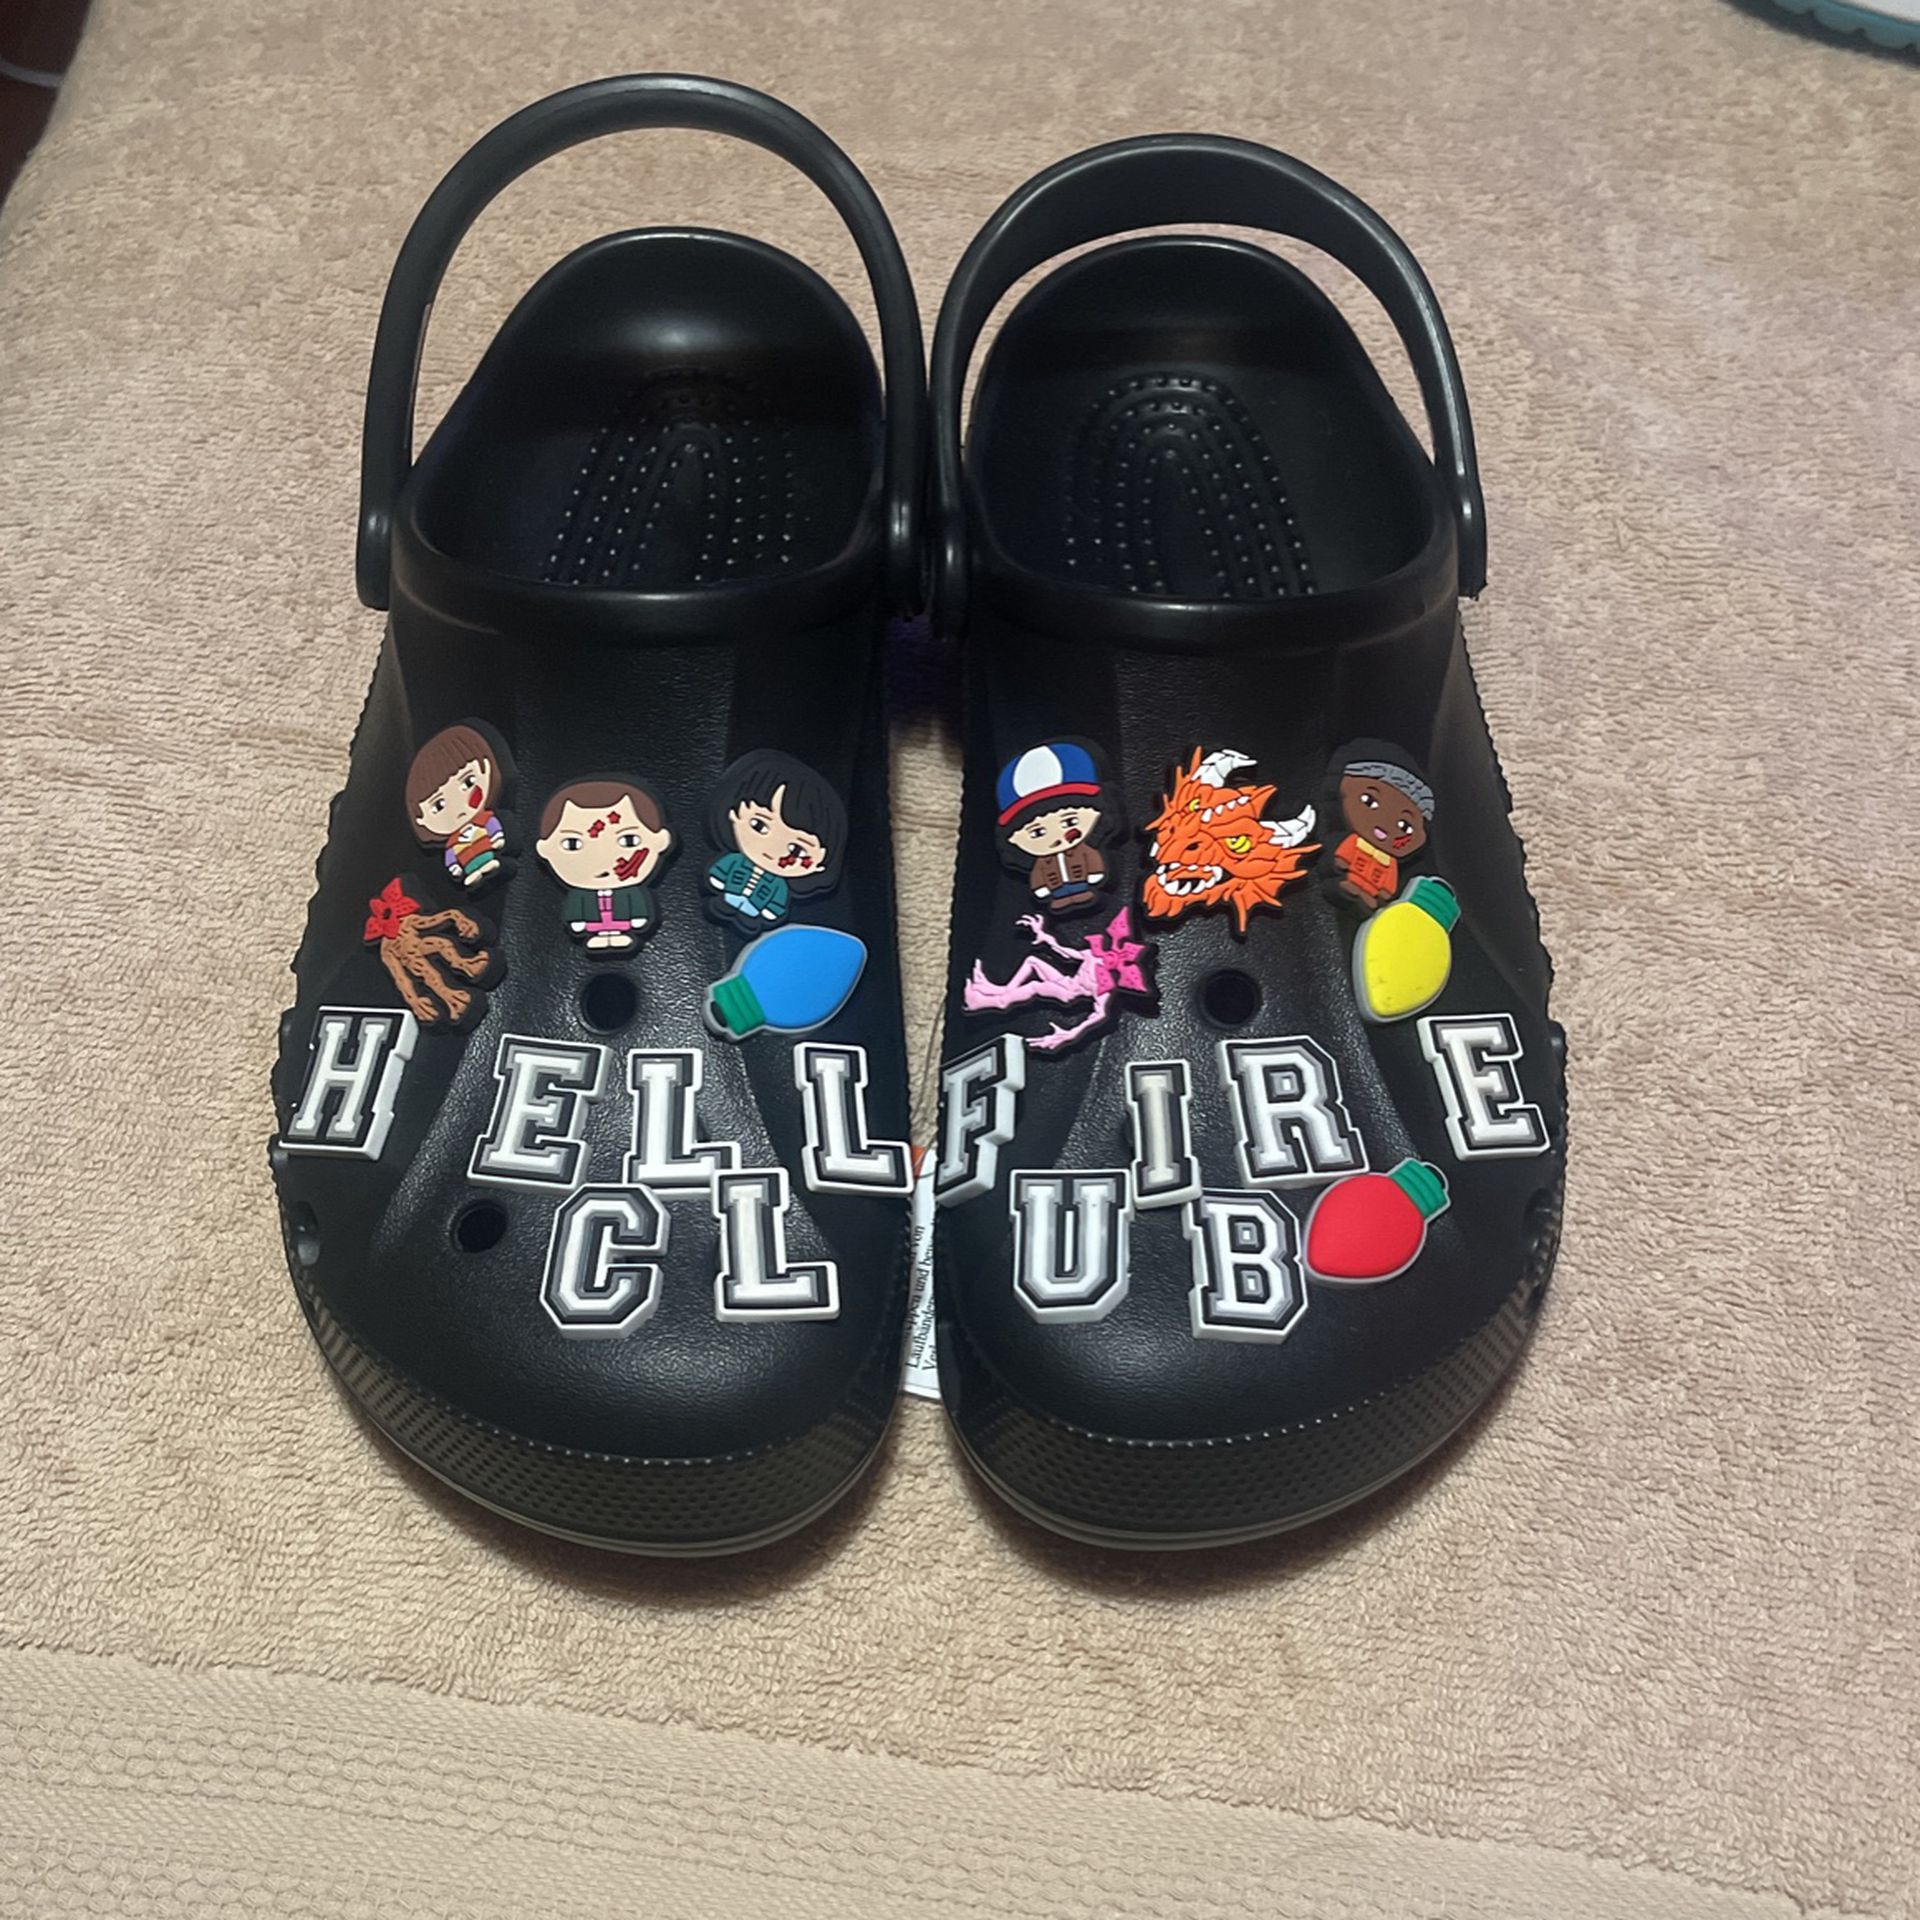 Crocs, $90, W/ 23 “Stranger Things” Charms, Unisex, Adult, Black,  Baya Clogs, Many Sizes, New With Tags, Great Gift !! 🎁